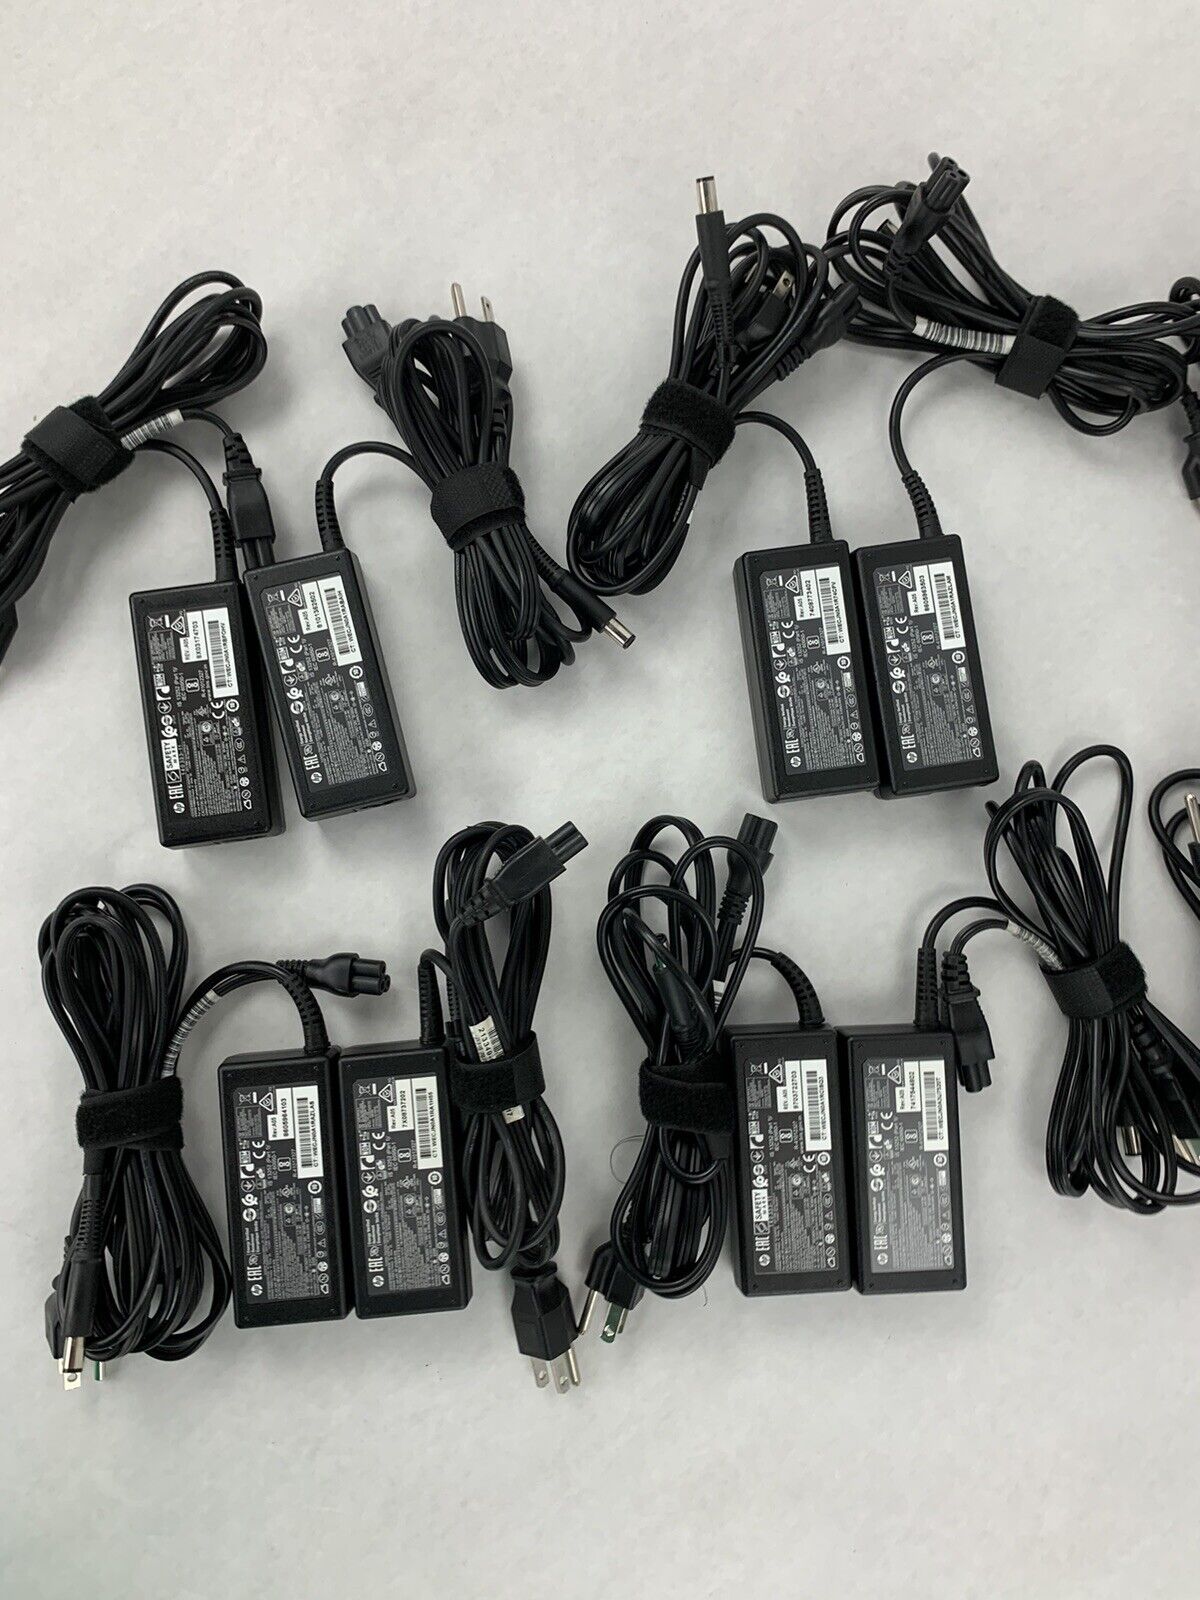 10x Lot Genuine HP PPP019L-S 19.5V 3.33A 65W AC Power Adapter 756413-001